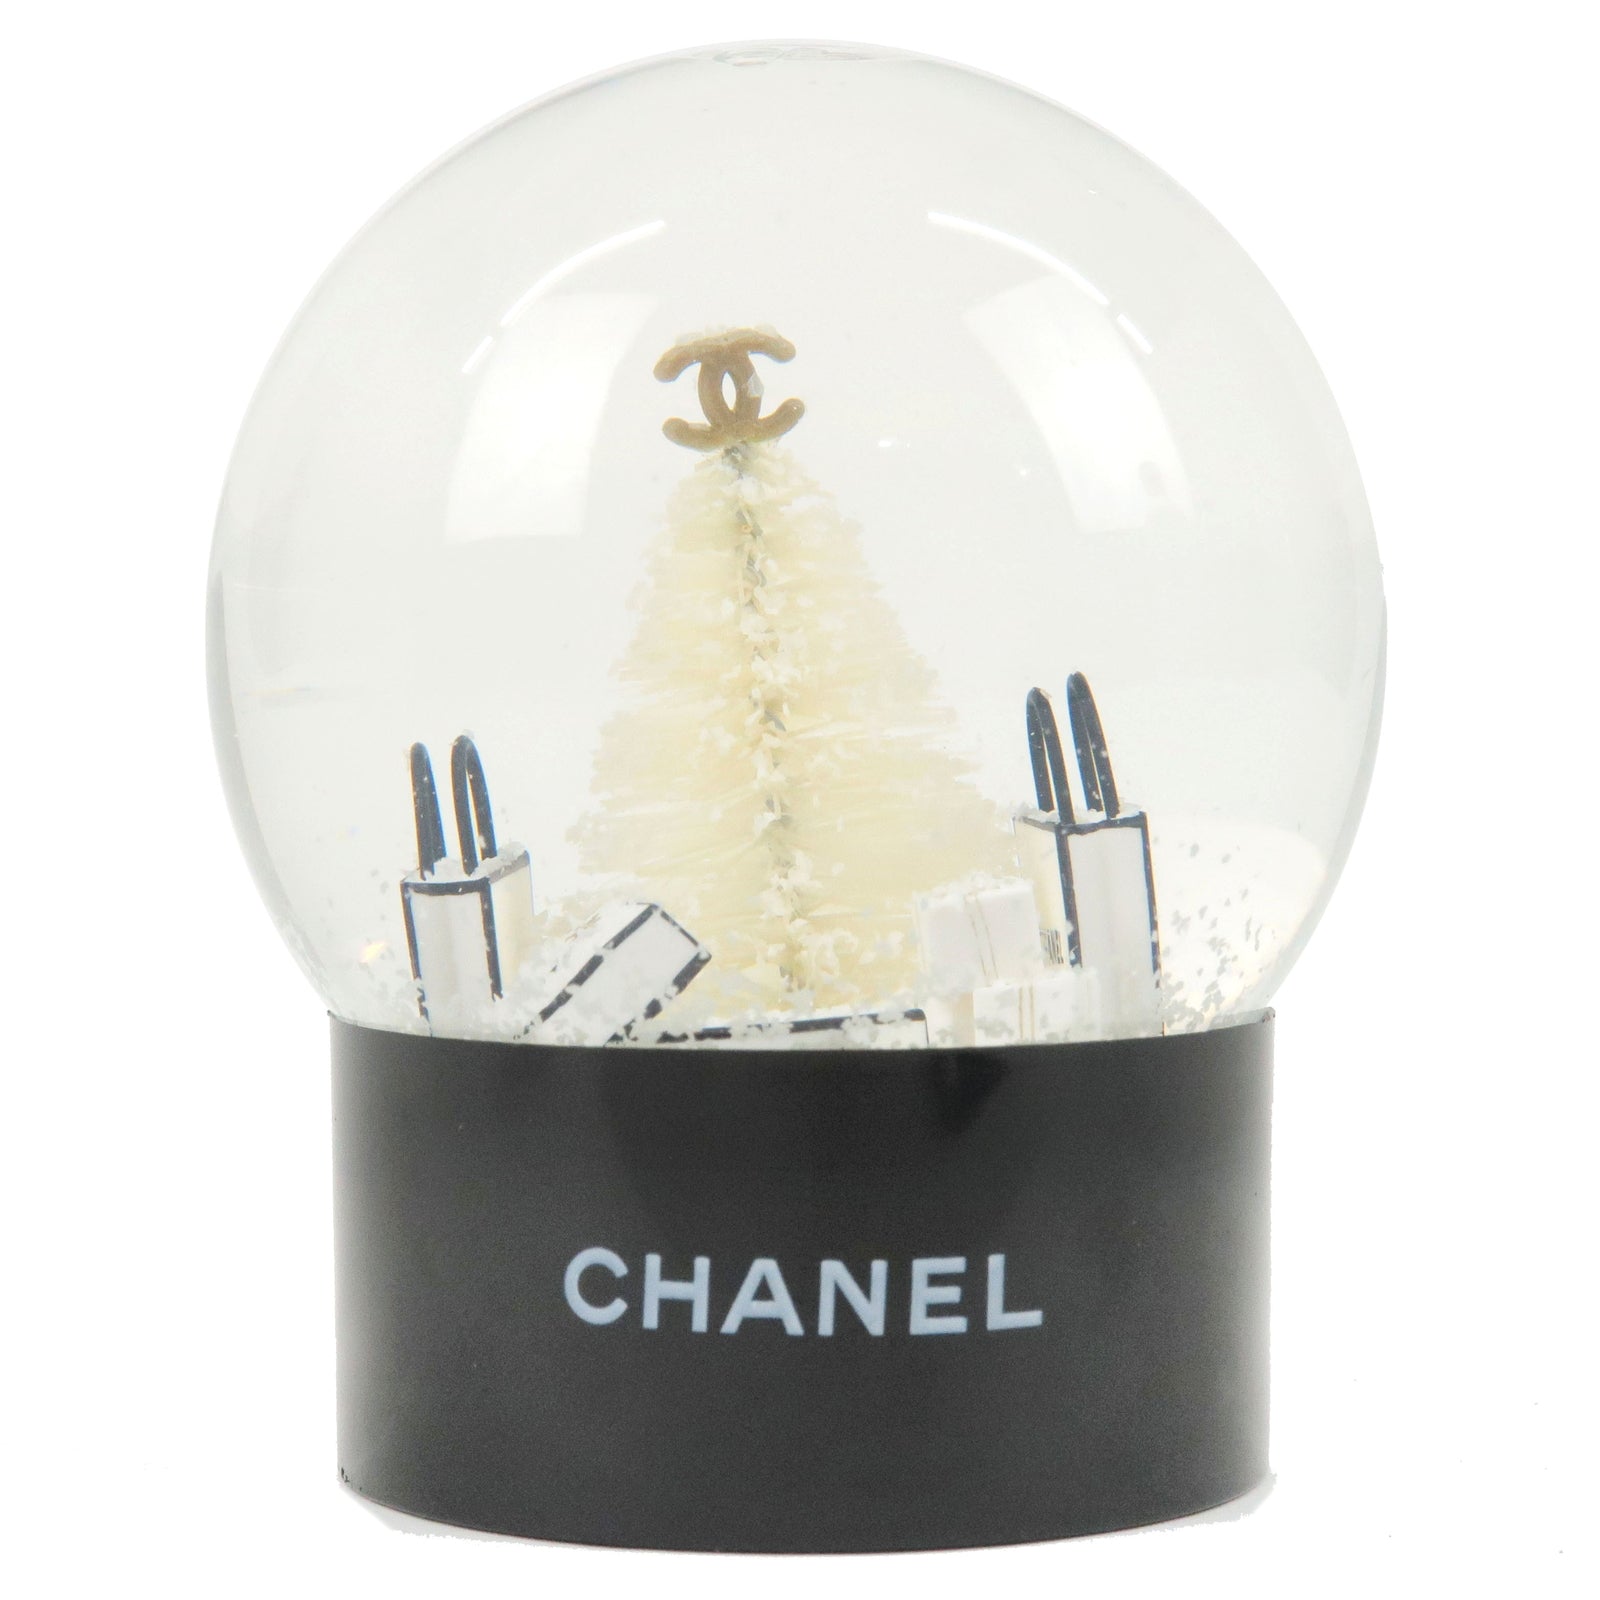 CHANEL-Snow-Globe-2012-Novelty-Brand-Accessory-Collection